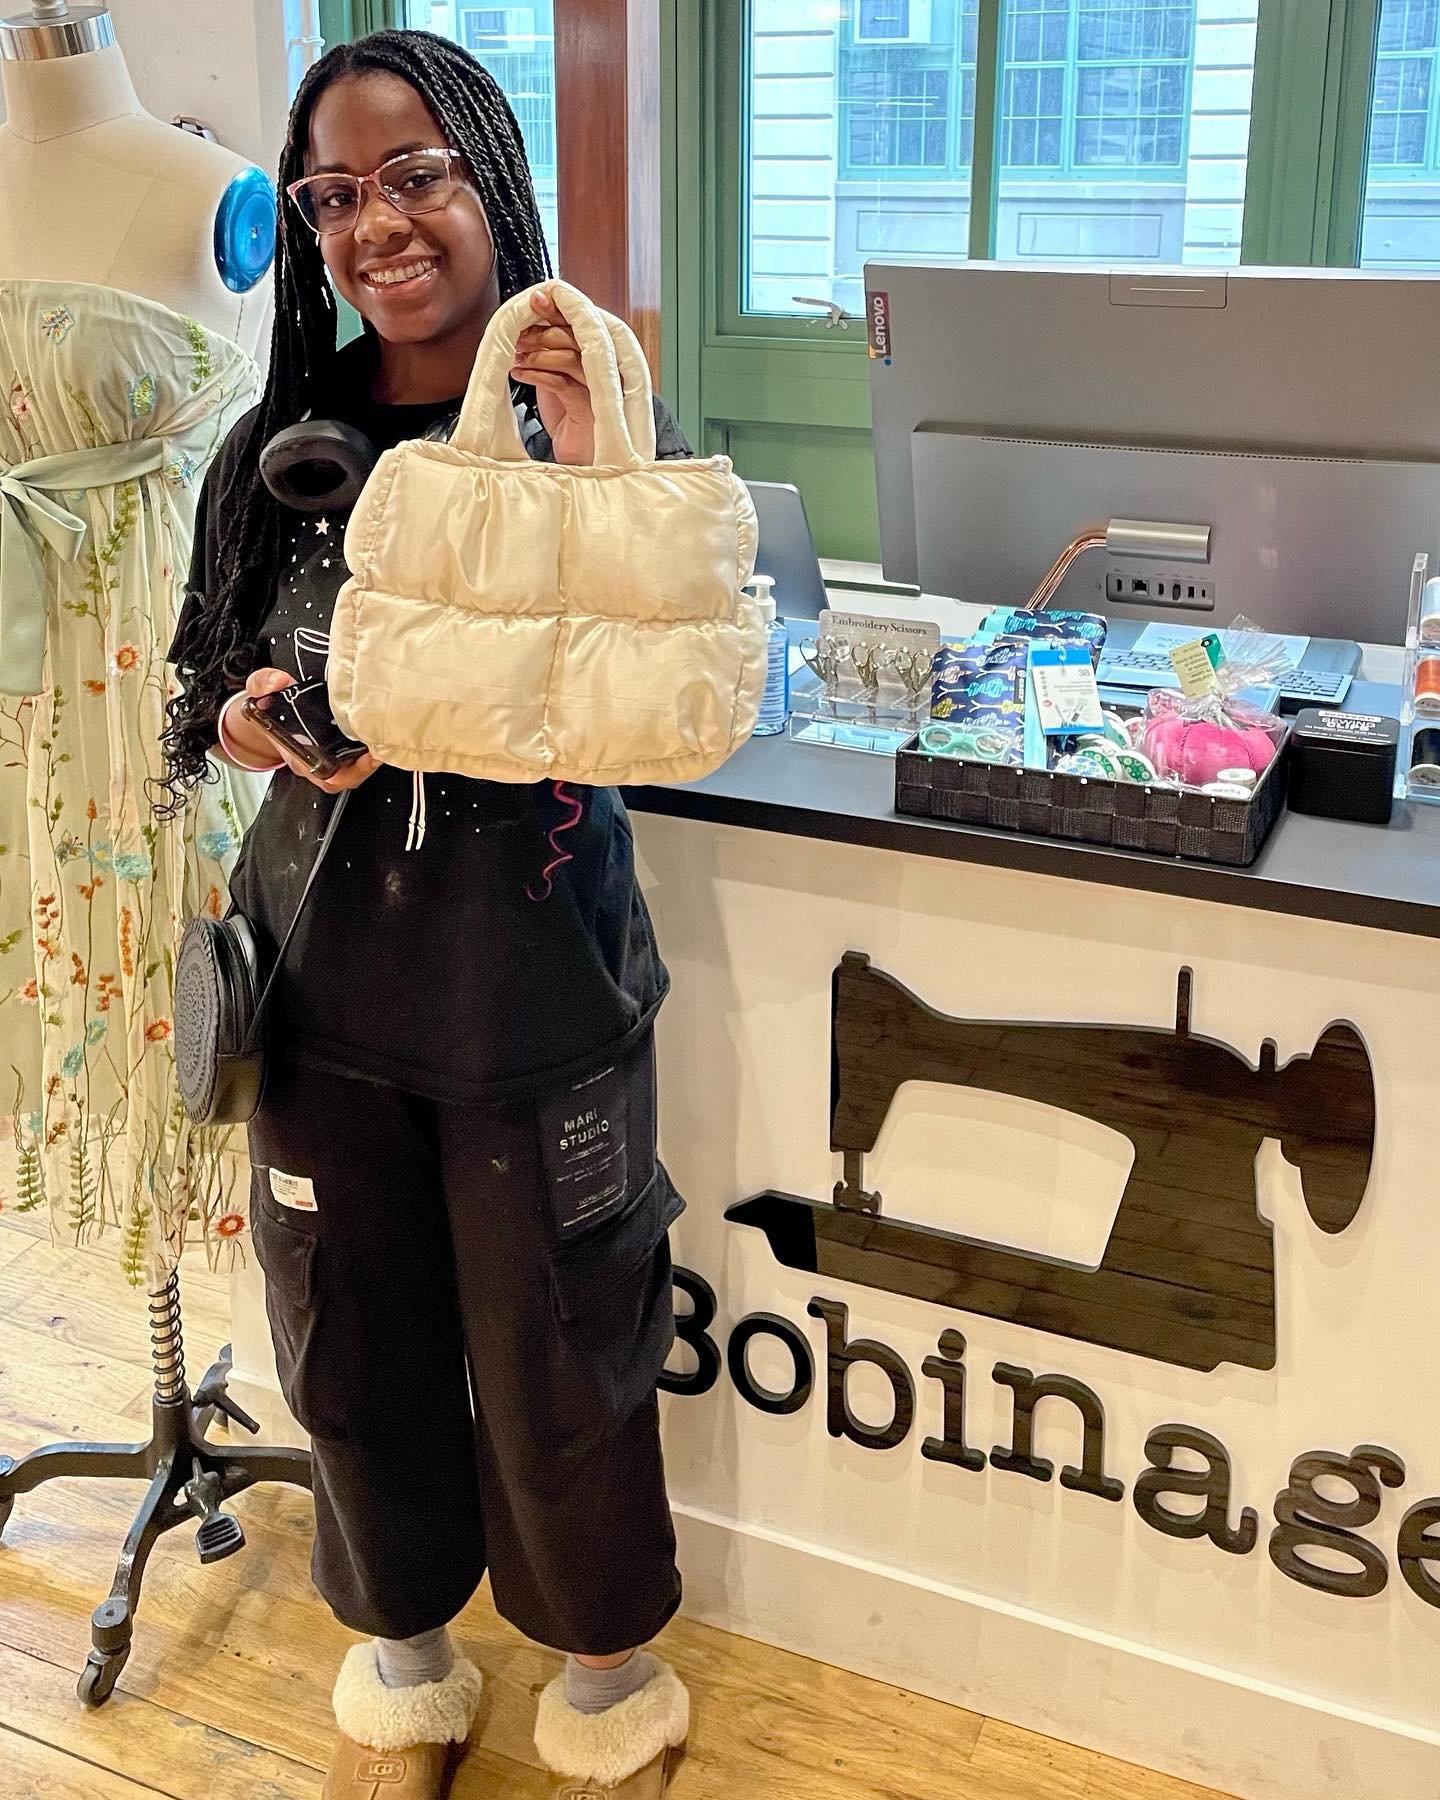 SEWING CLASSES GALORE 😃🪡✂️✨🎉 Satin Puffer Bag, Zipper Pouch Boxy, Basic Tote Bag &amp; Adrienne Blouse‼️‼️‼️#sewing #classes #learn #new #skills #lifeskills #brooklyn #ny @japanvillagebrooklyn @industrycity #schools #summer #activity #fun